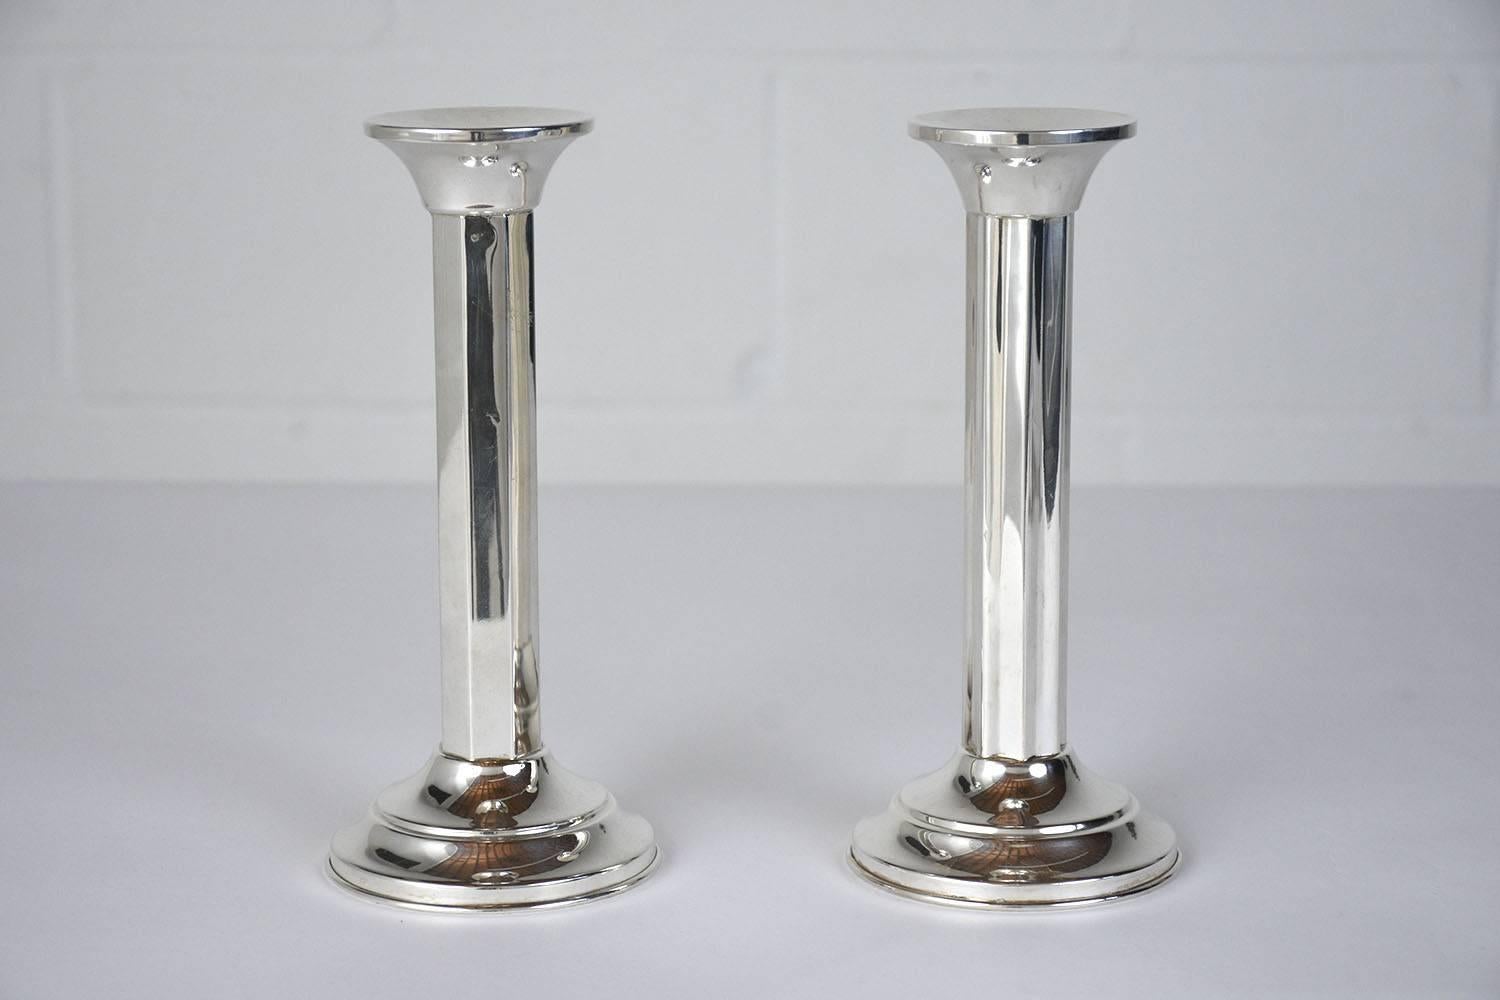 This pair of 1920s Art Deco-style candleholders are made from sterling silver stamped .800. The candle holders have a Classic design with faceted sides and a rounded base. This pair of candleholders is sturdy, elegant, and ready to be used in any